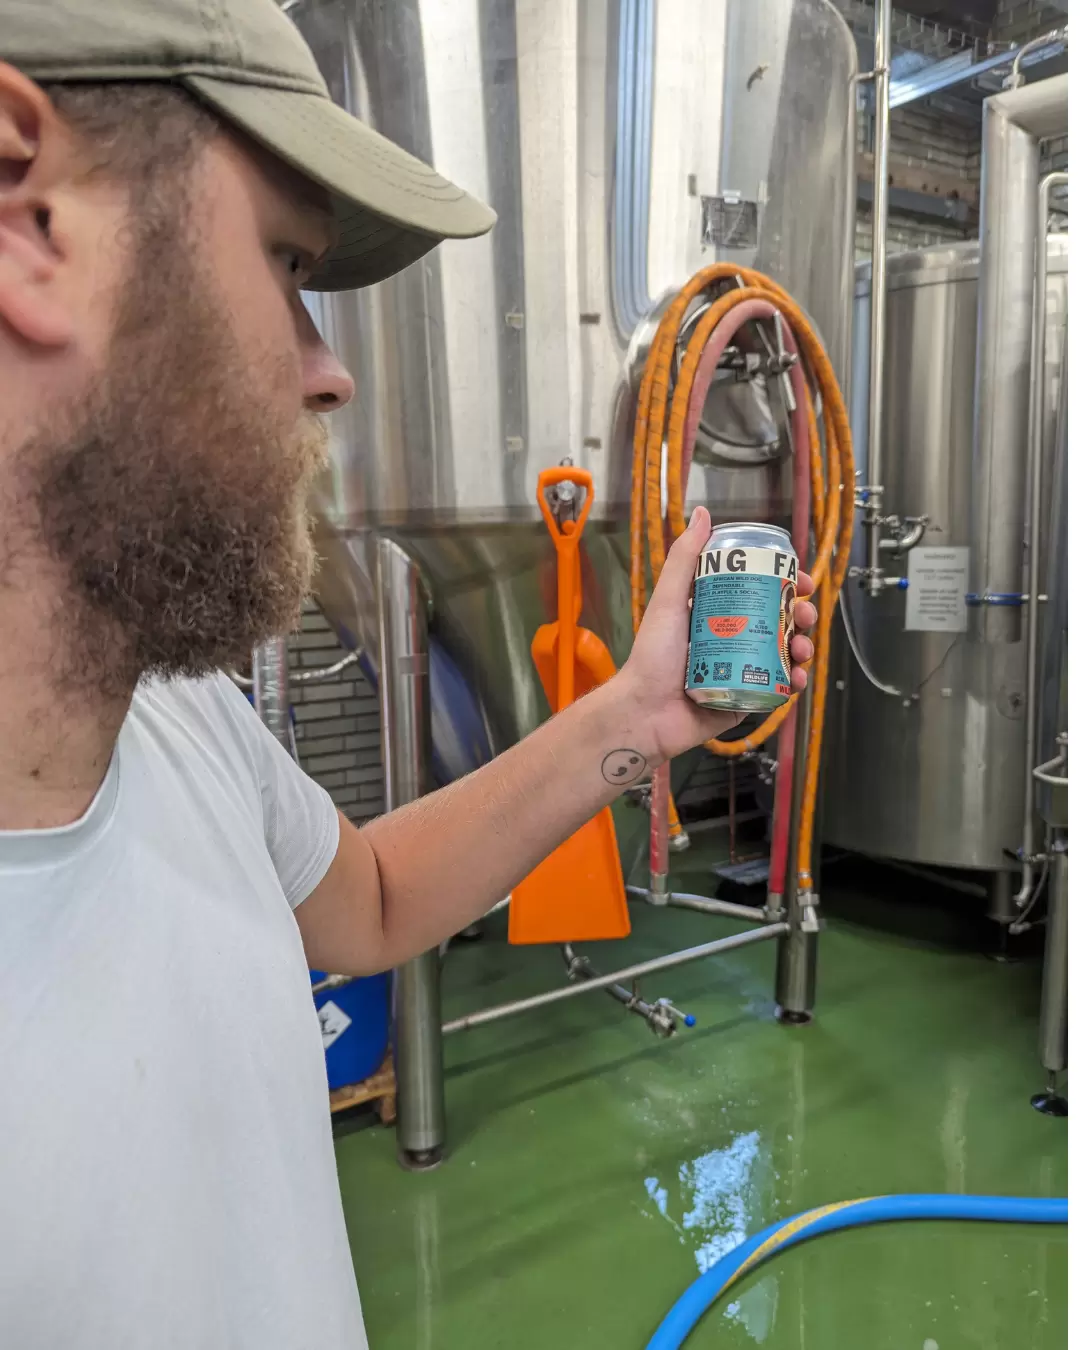 Phil Howard standing in the brewery holding a can of Wild Dog IPA beer and reading the information on the label about wildlife conservation